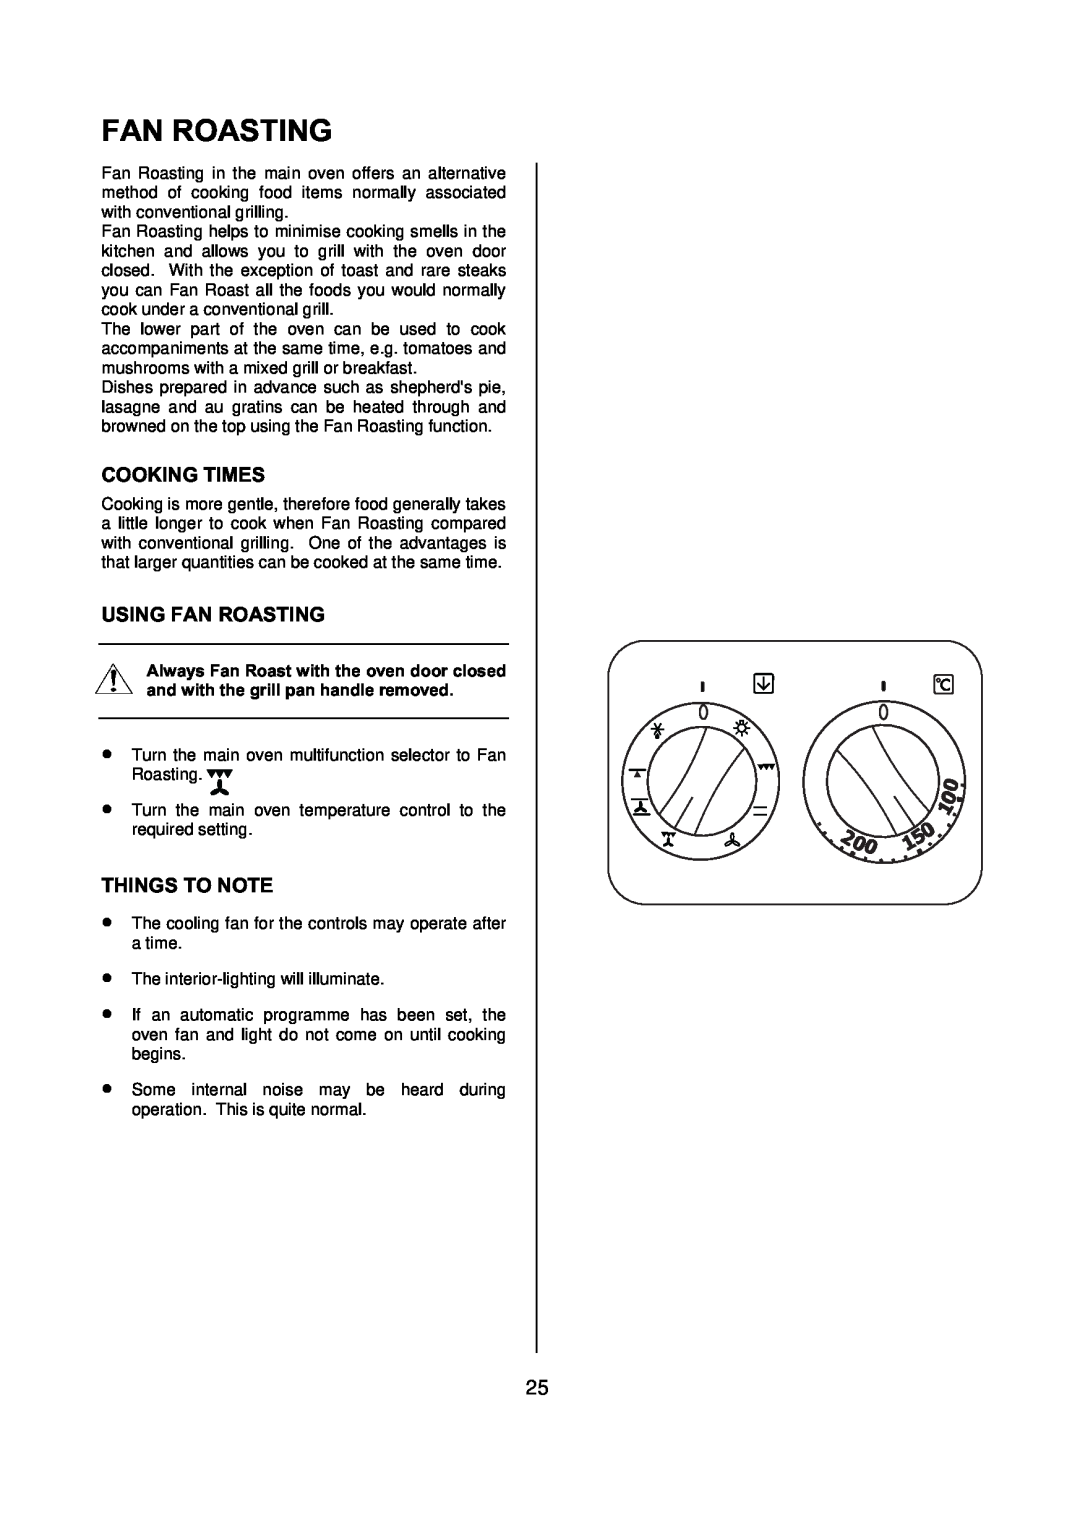 Electrolux D77000 user manual Cooking Times, Using Fan Roasting, Things To Note 